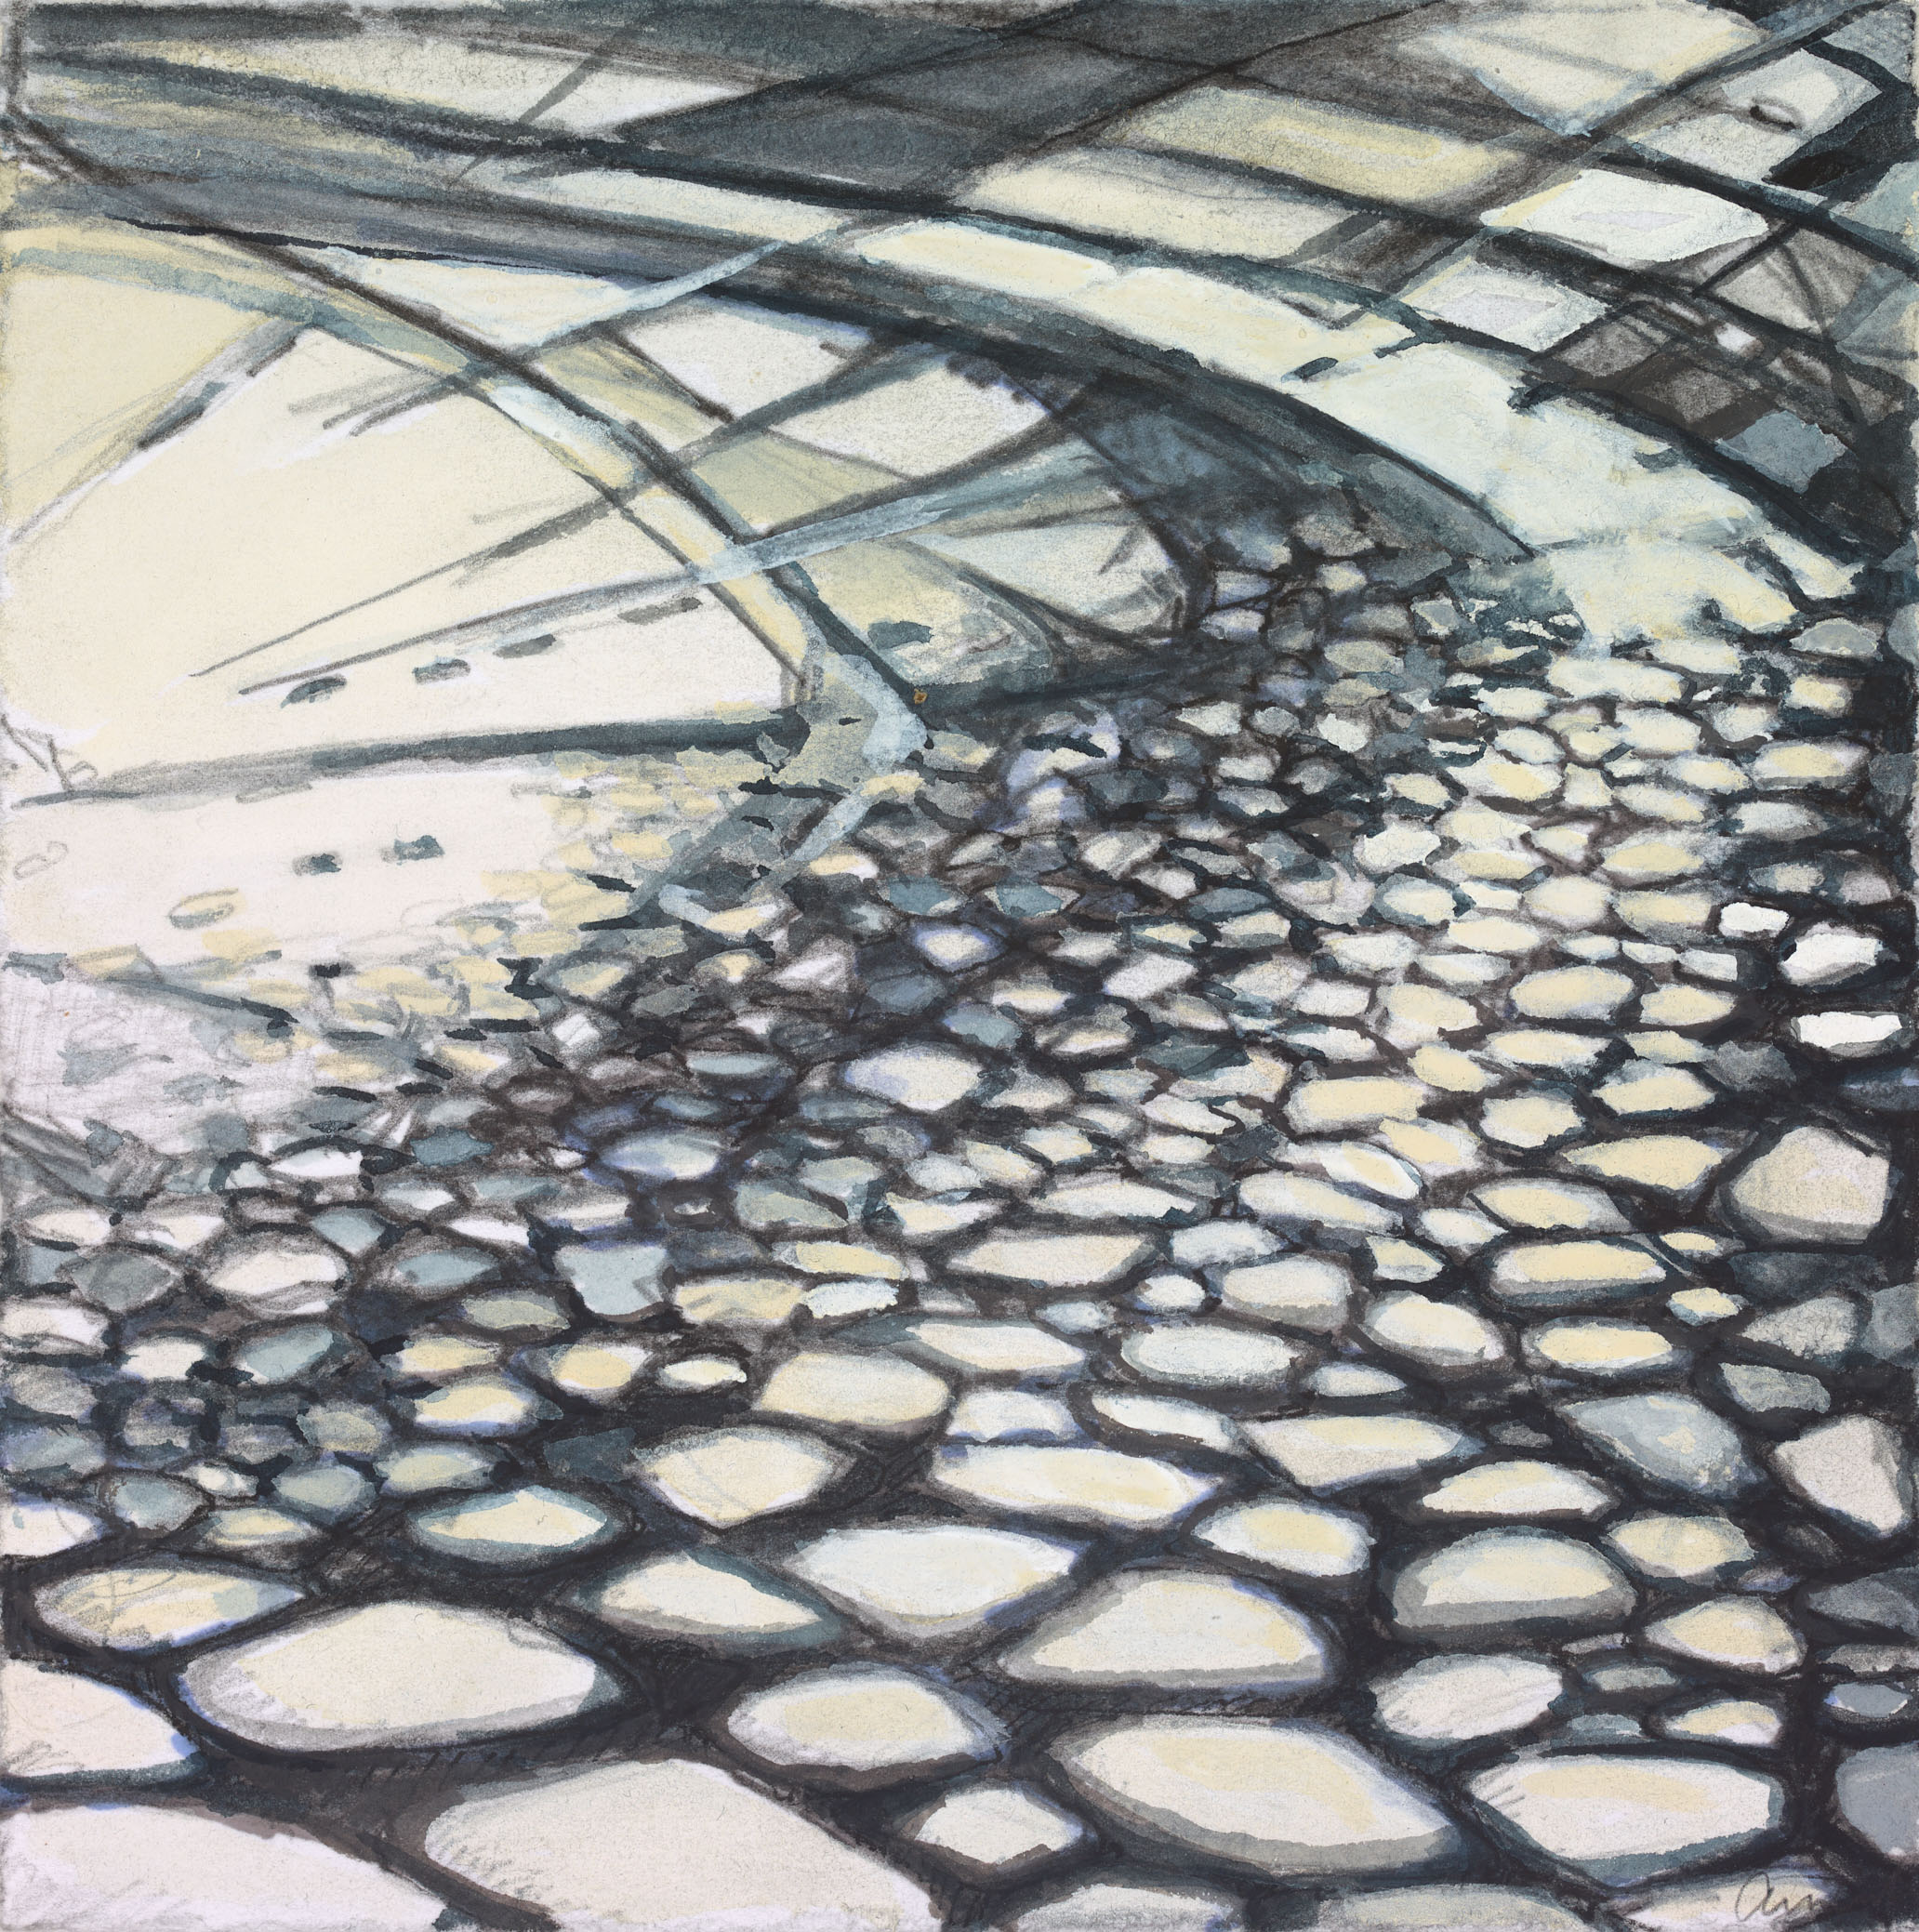 Beach Path Rocks, 2021, mixed media on paper, 8 x 8 inches